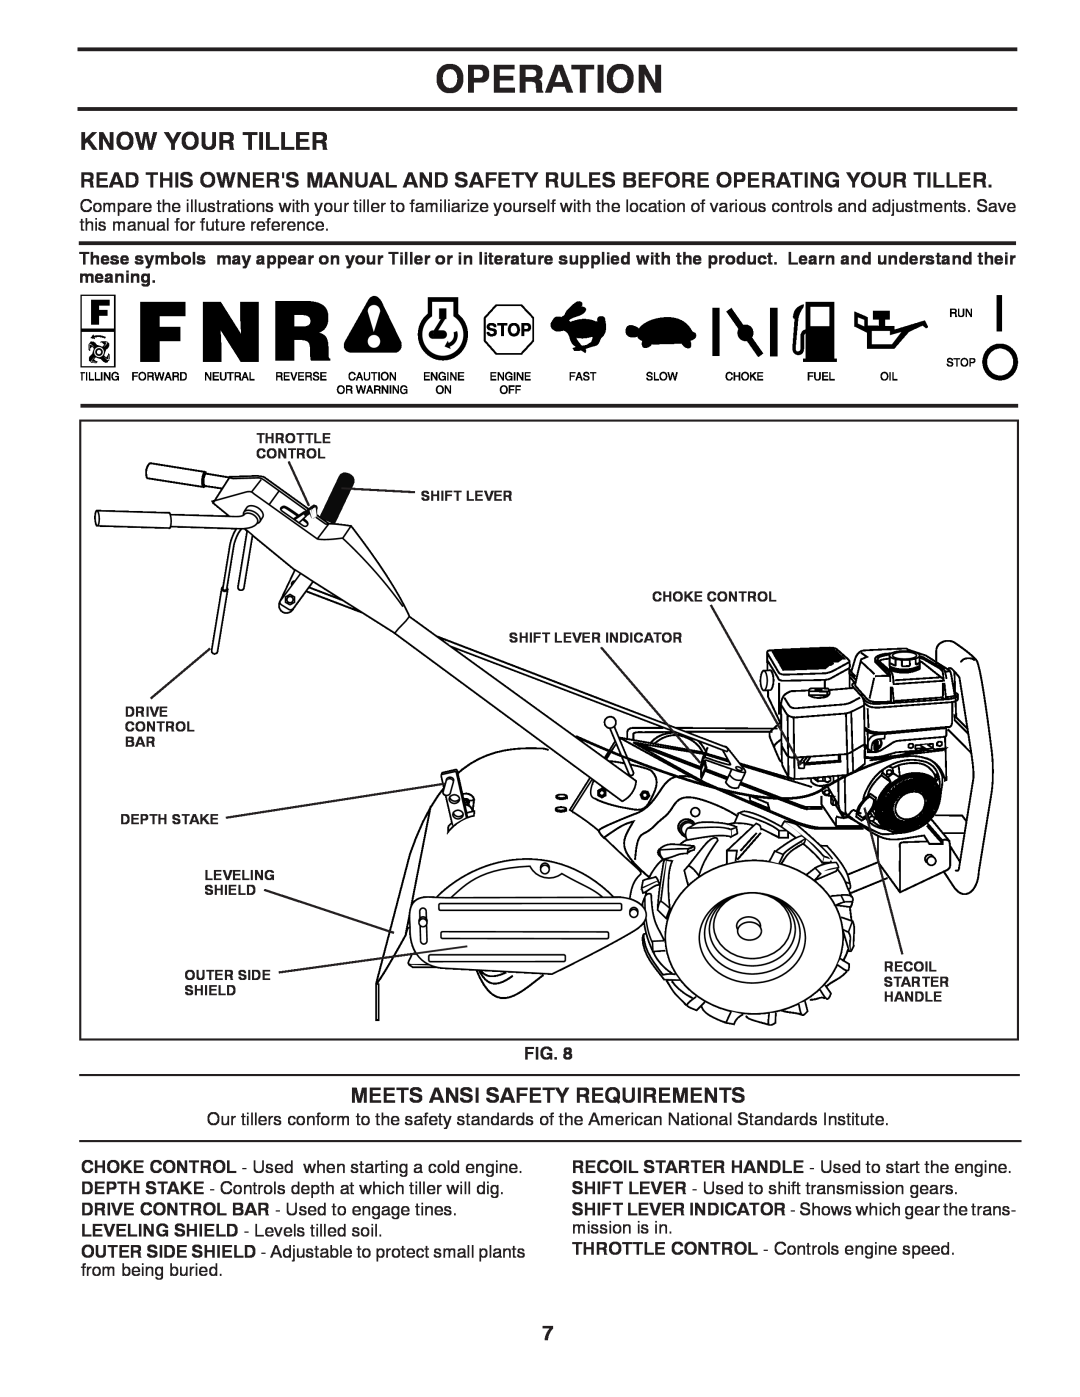 Poulan PRRT875X manual Operation, Know Your Tiller, Meets Ansi Safety Requirements 